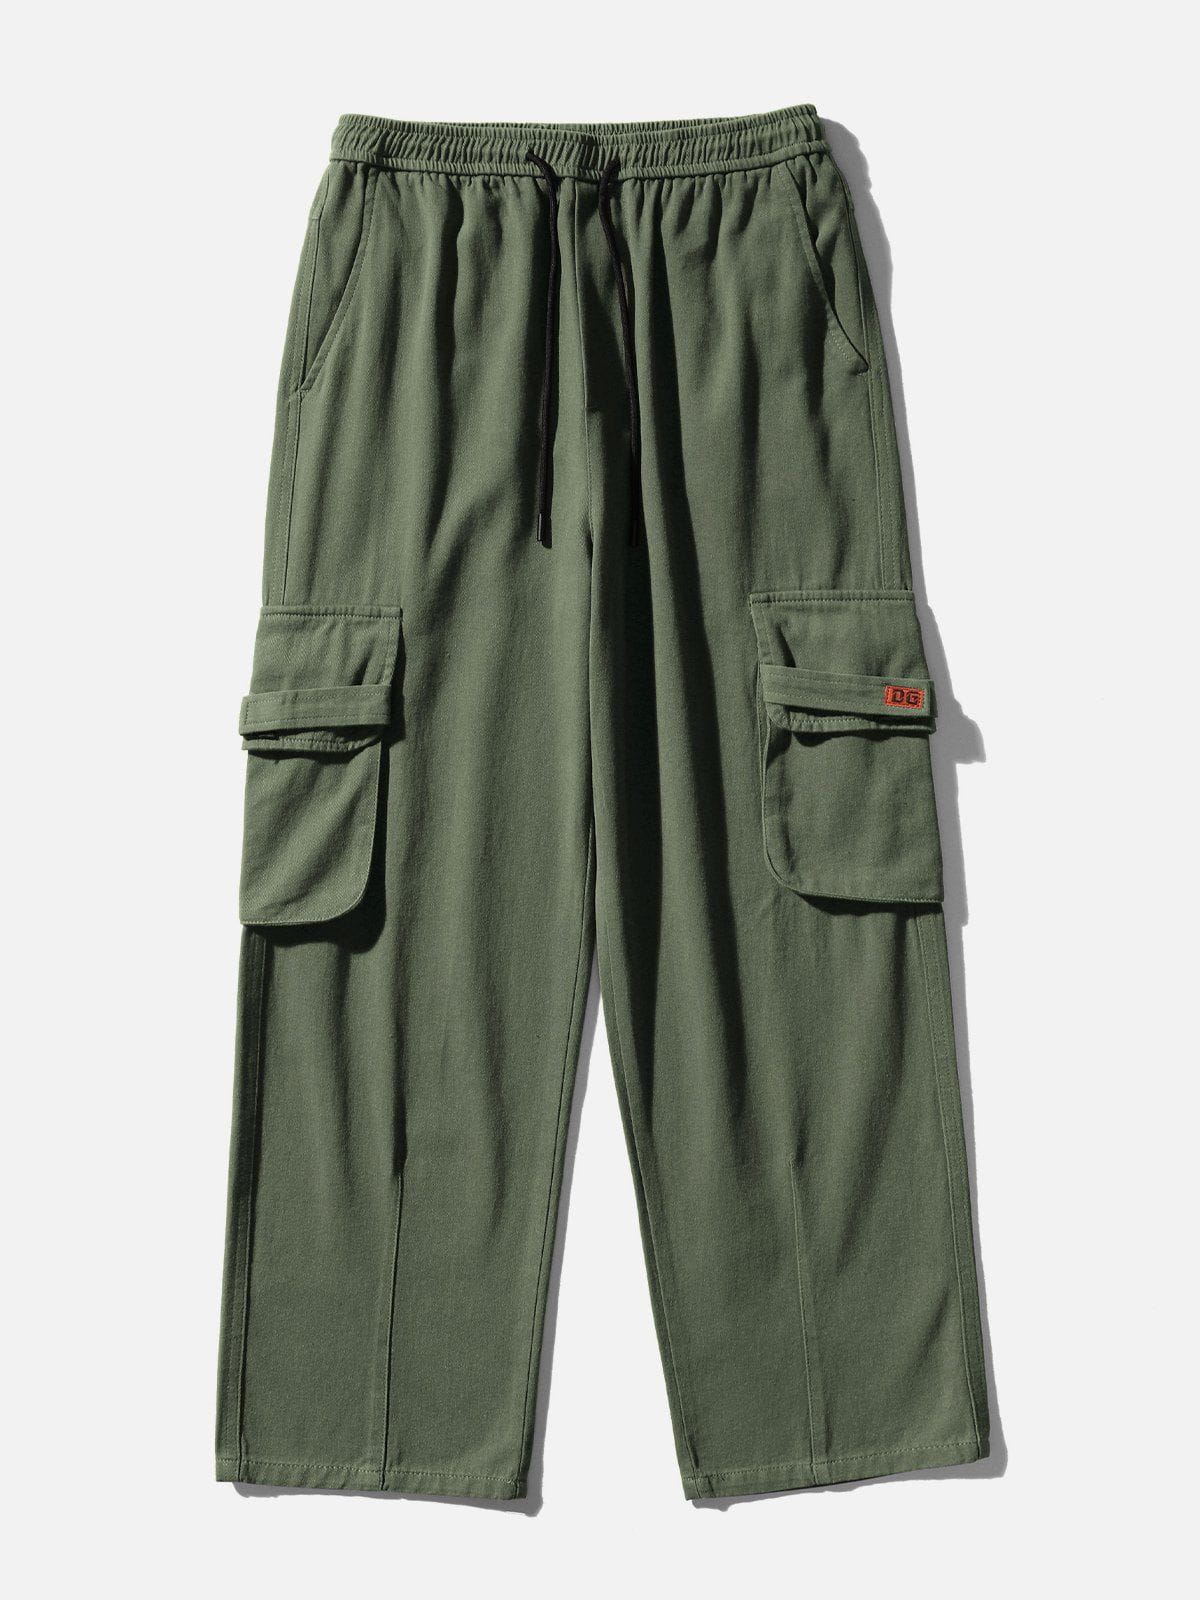 Sneakerland® - Embroidered Patch Multi-Pocket Cargo Pants